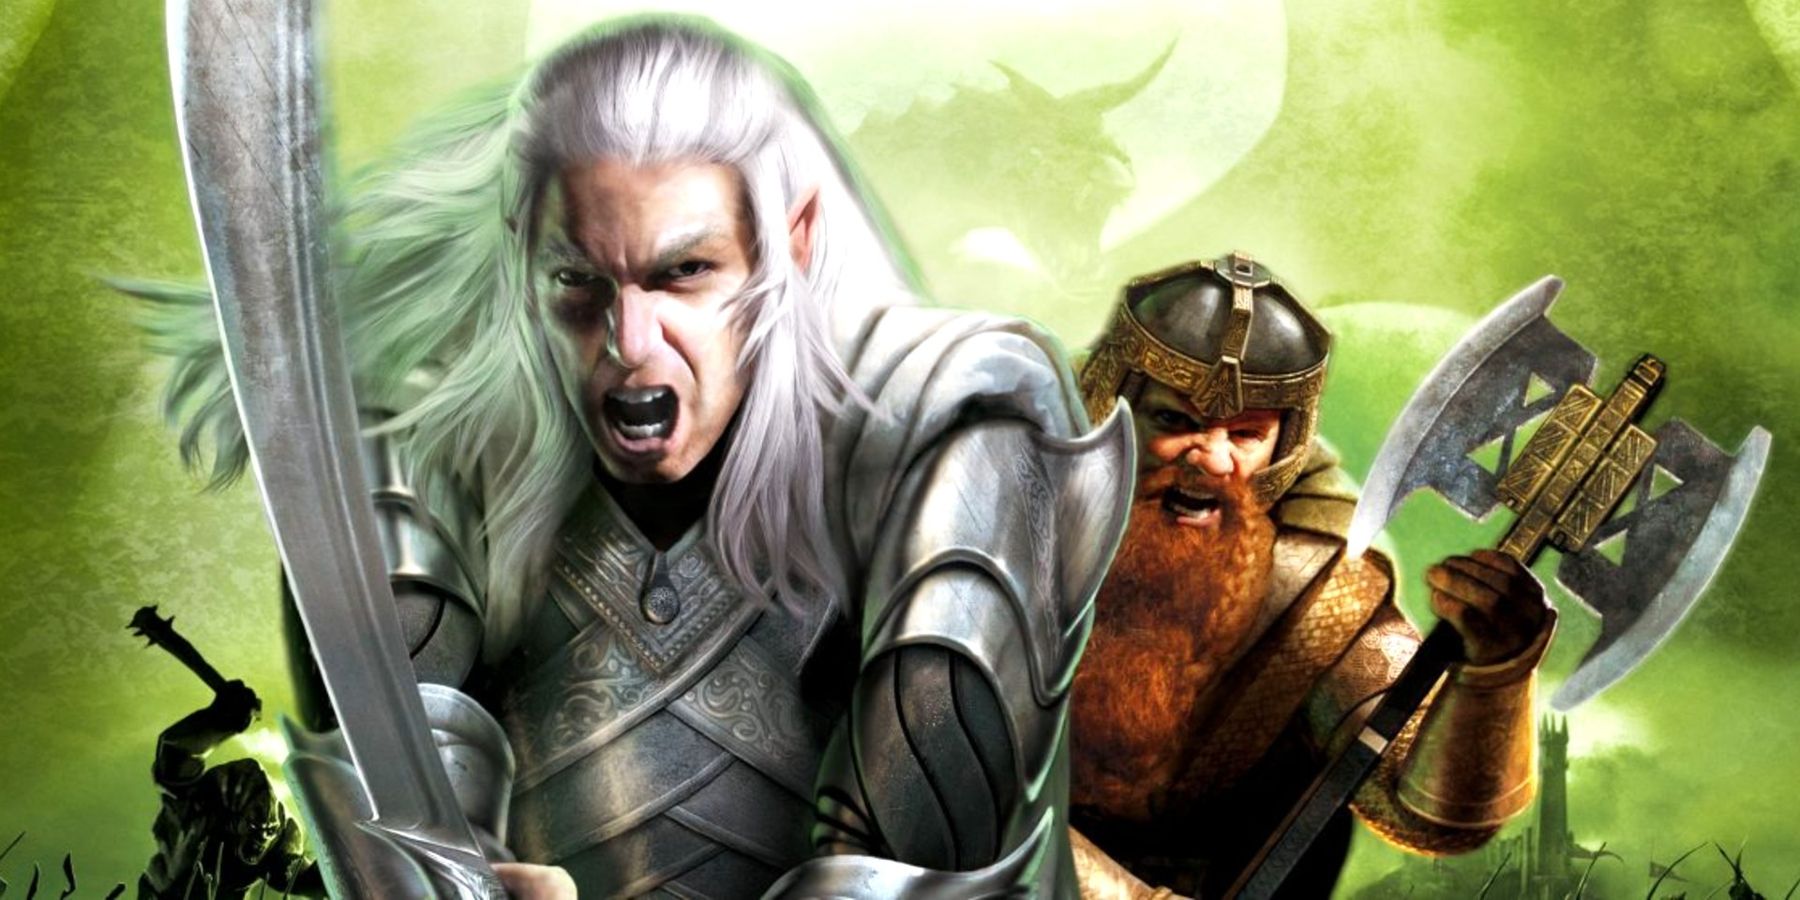 Glorfindel and Gimli readying their weapons in The Lord Of The Rings Battle For Middle-Earth II